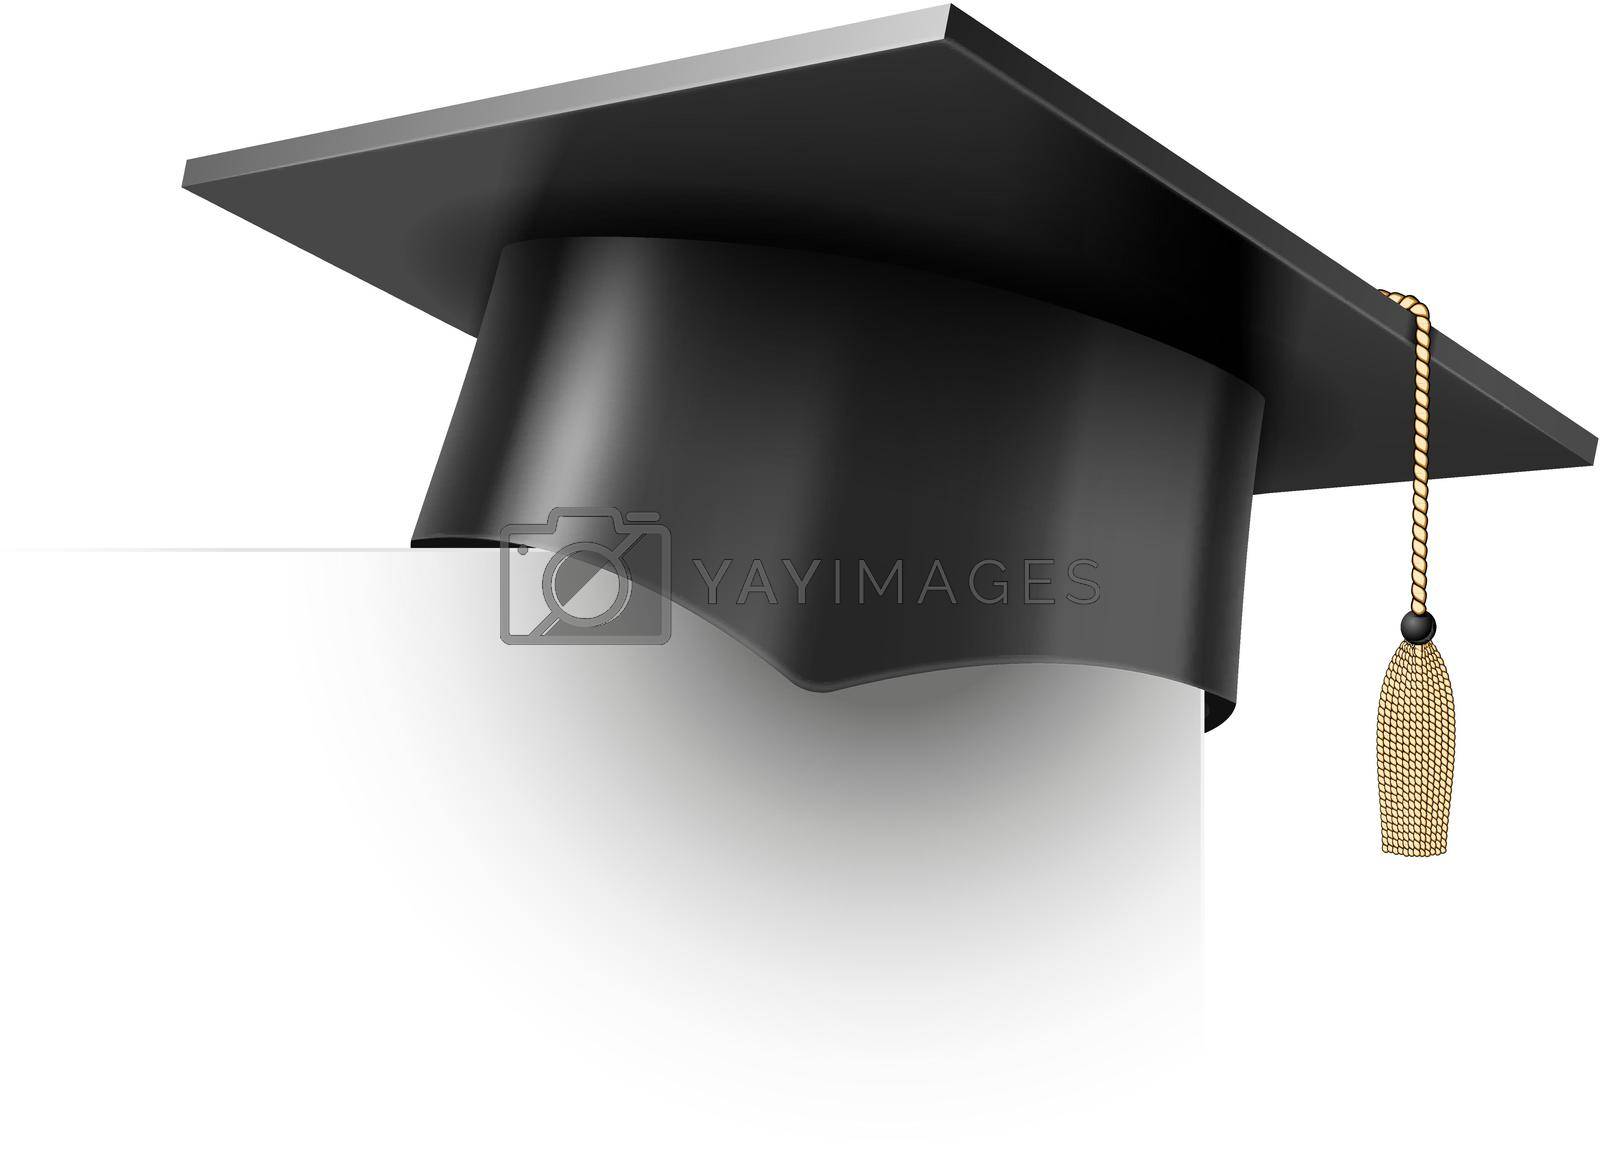 Realistic Vector Education Cup on White Background